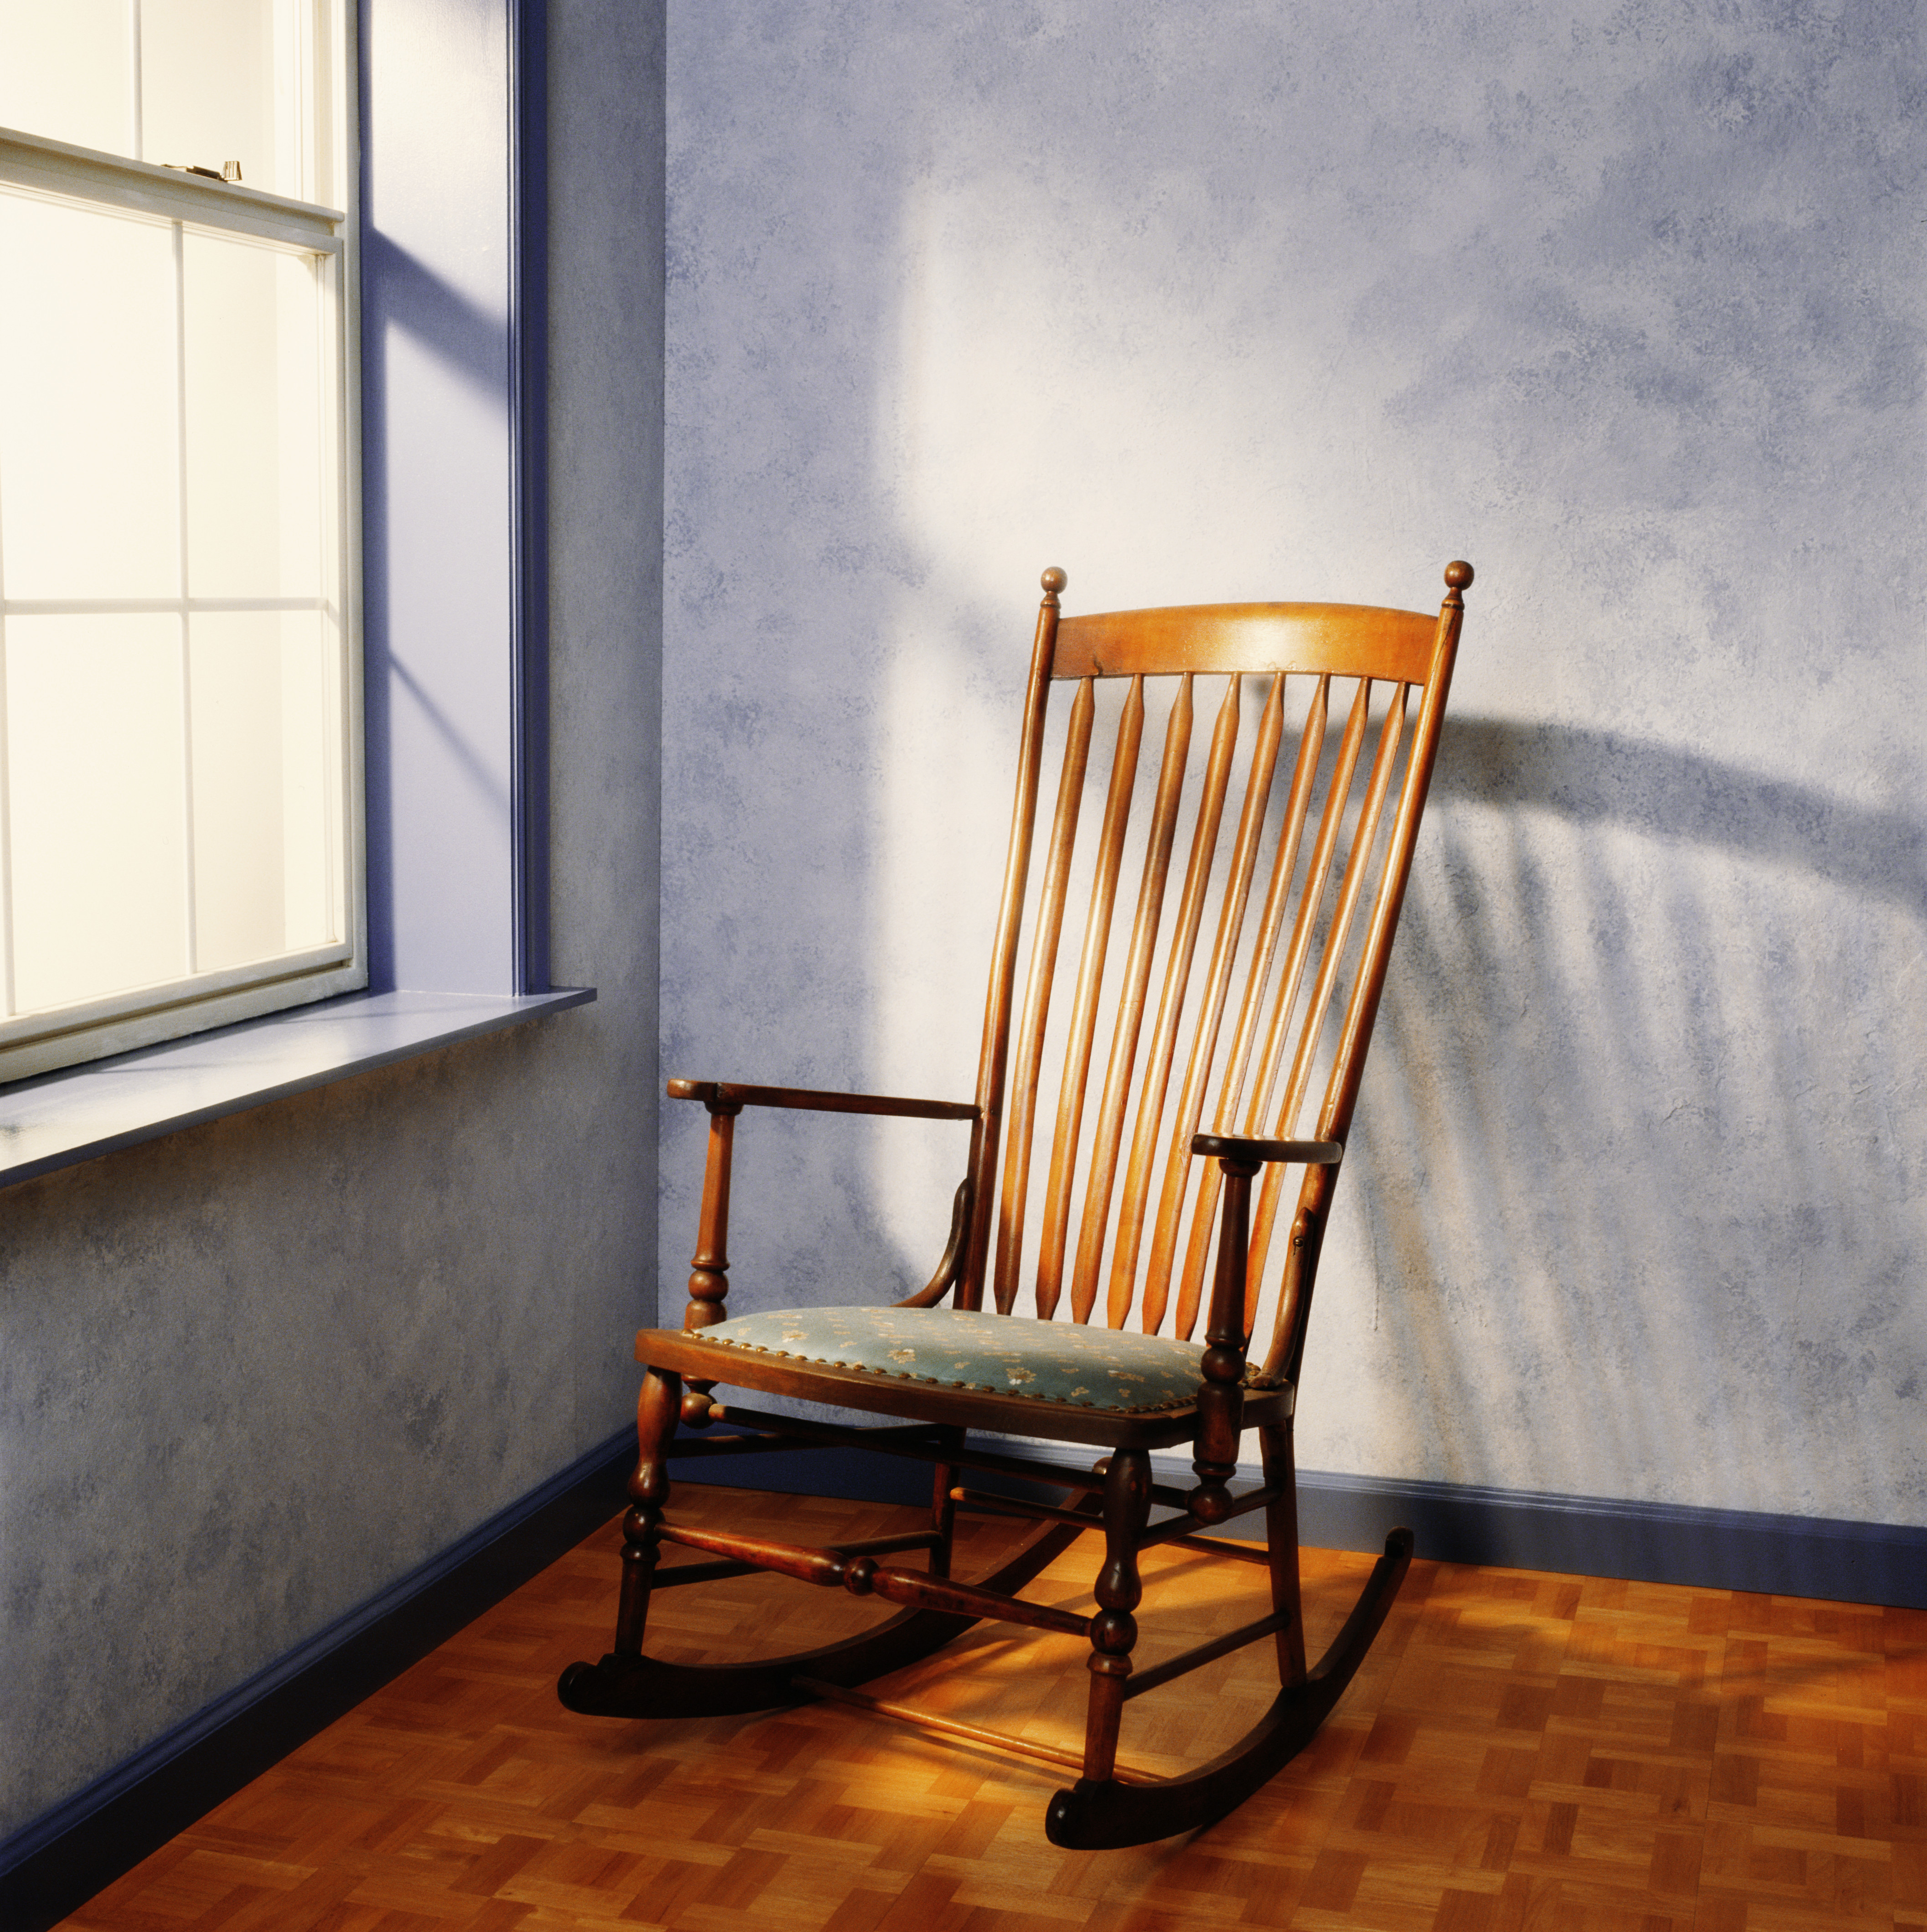 An empty rocking chair near a window | Source: Getty Images